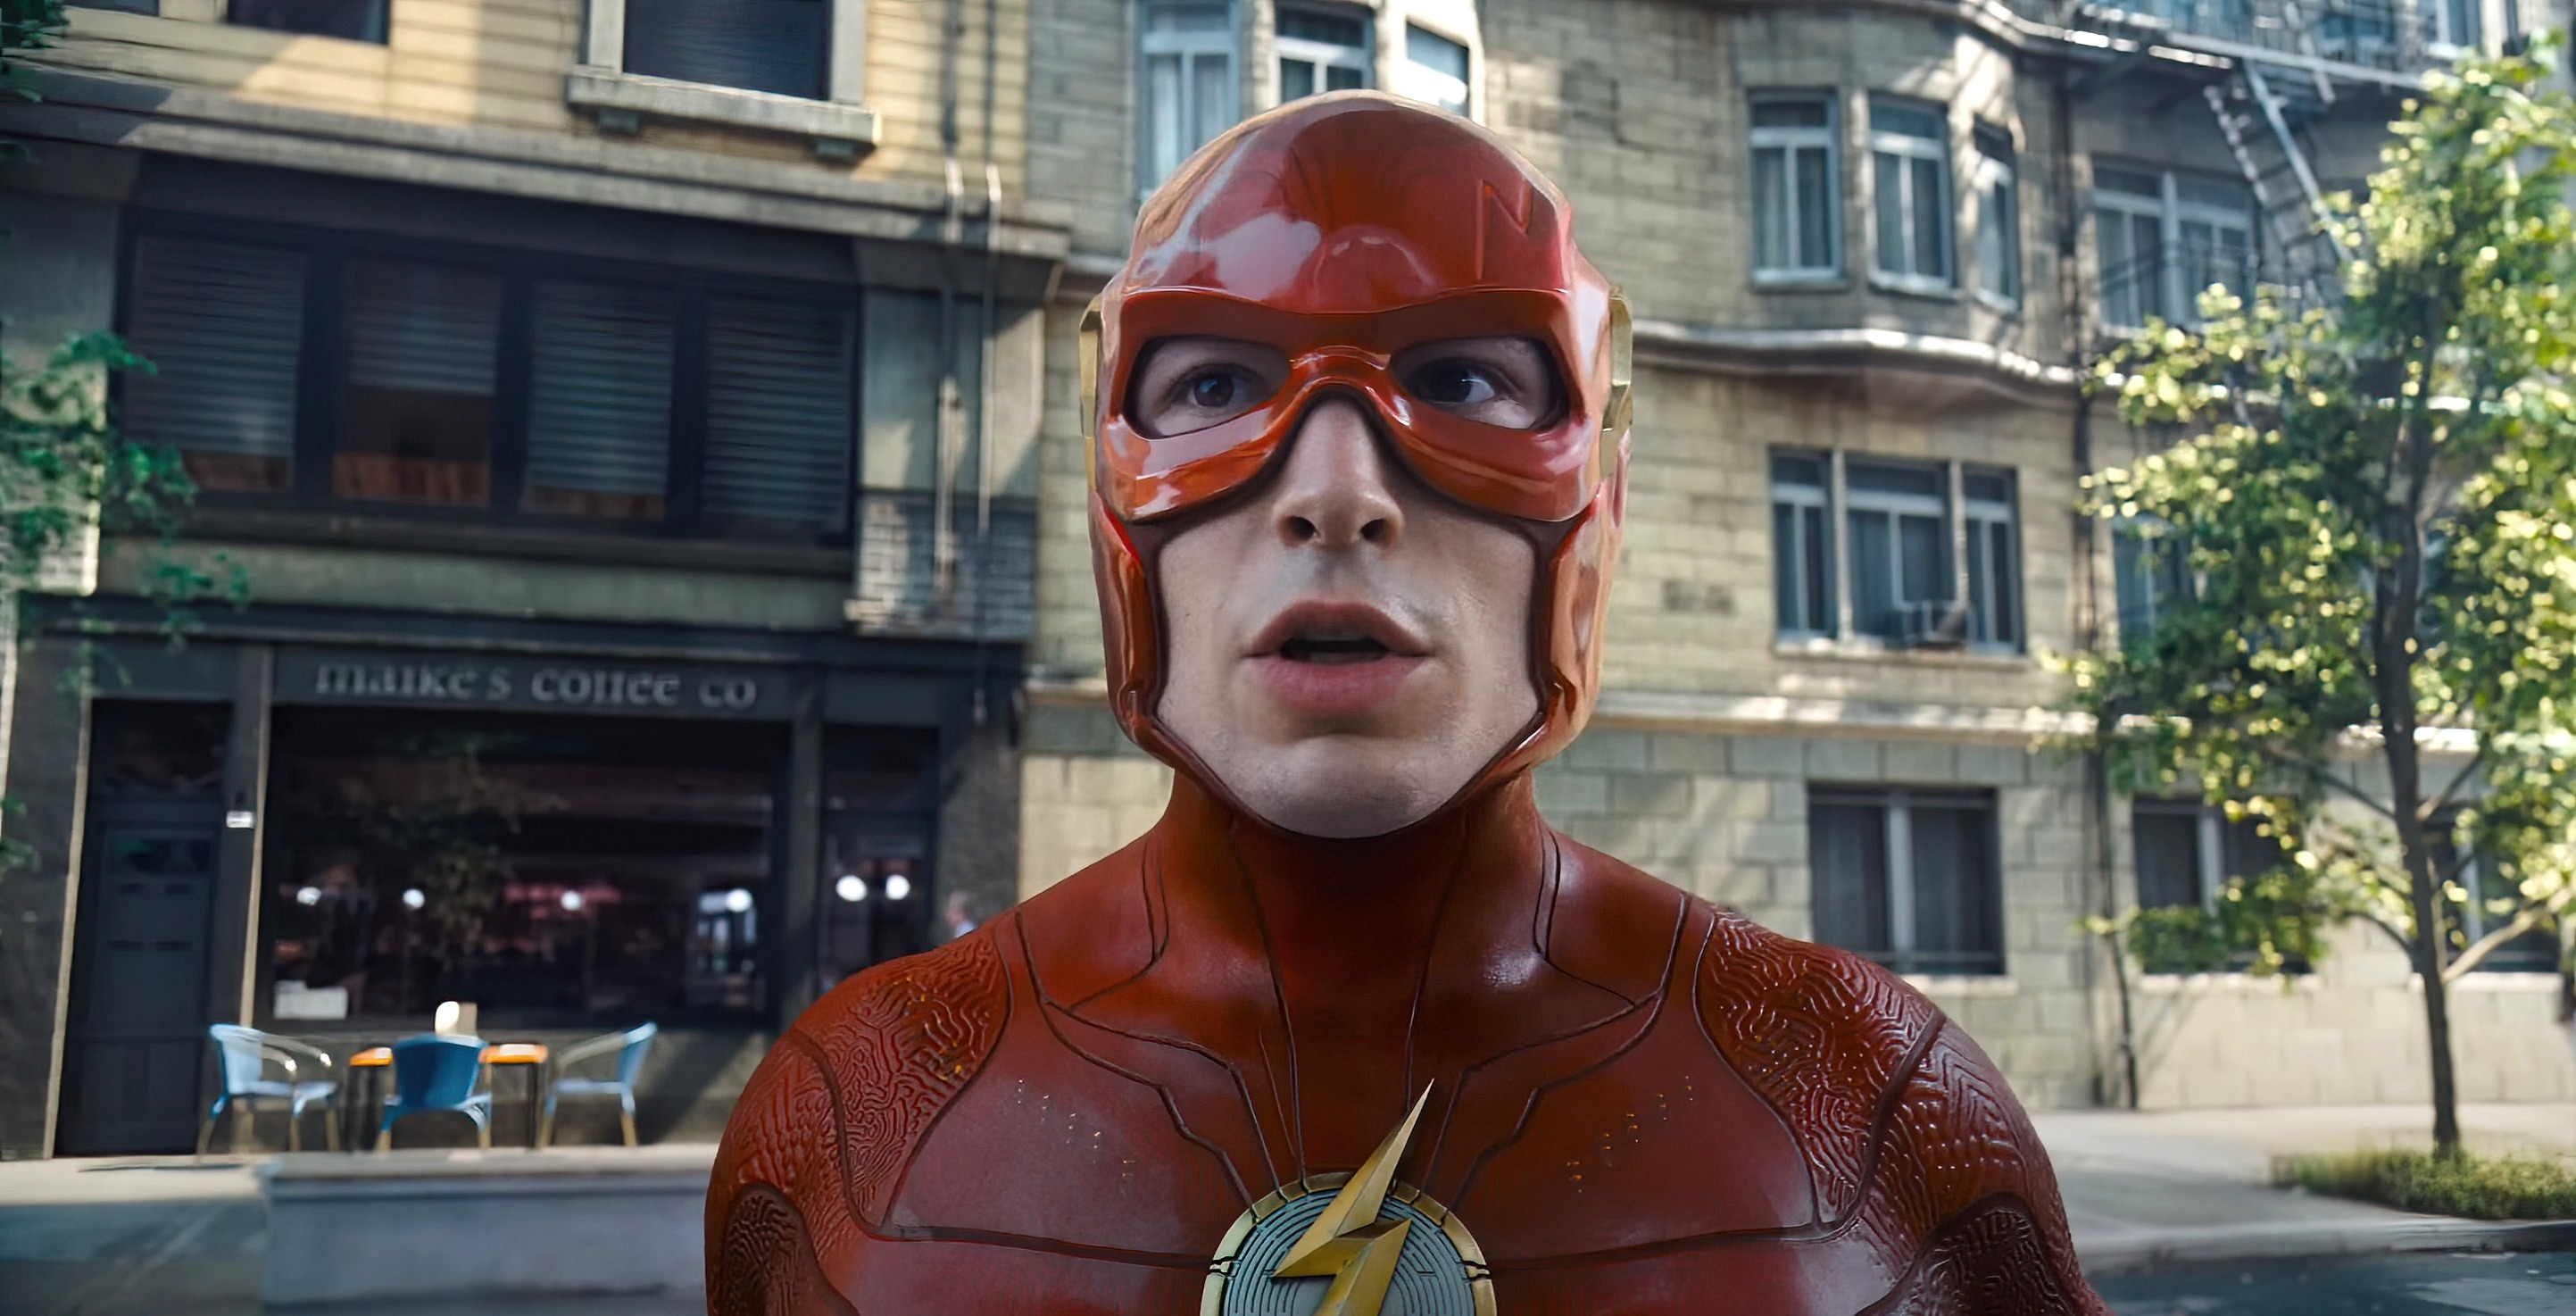 The Flash stands in a street, wearing a detailed superhero suit with a lightning bolt emblem and red mask